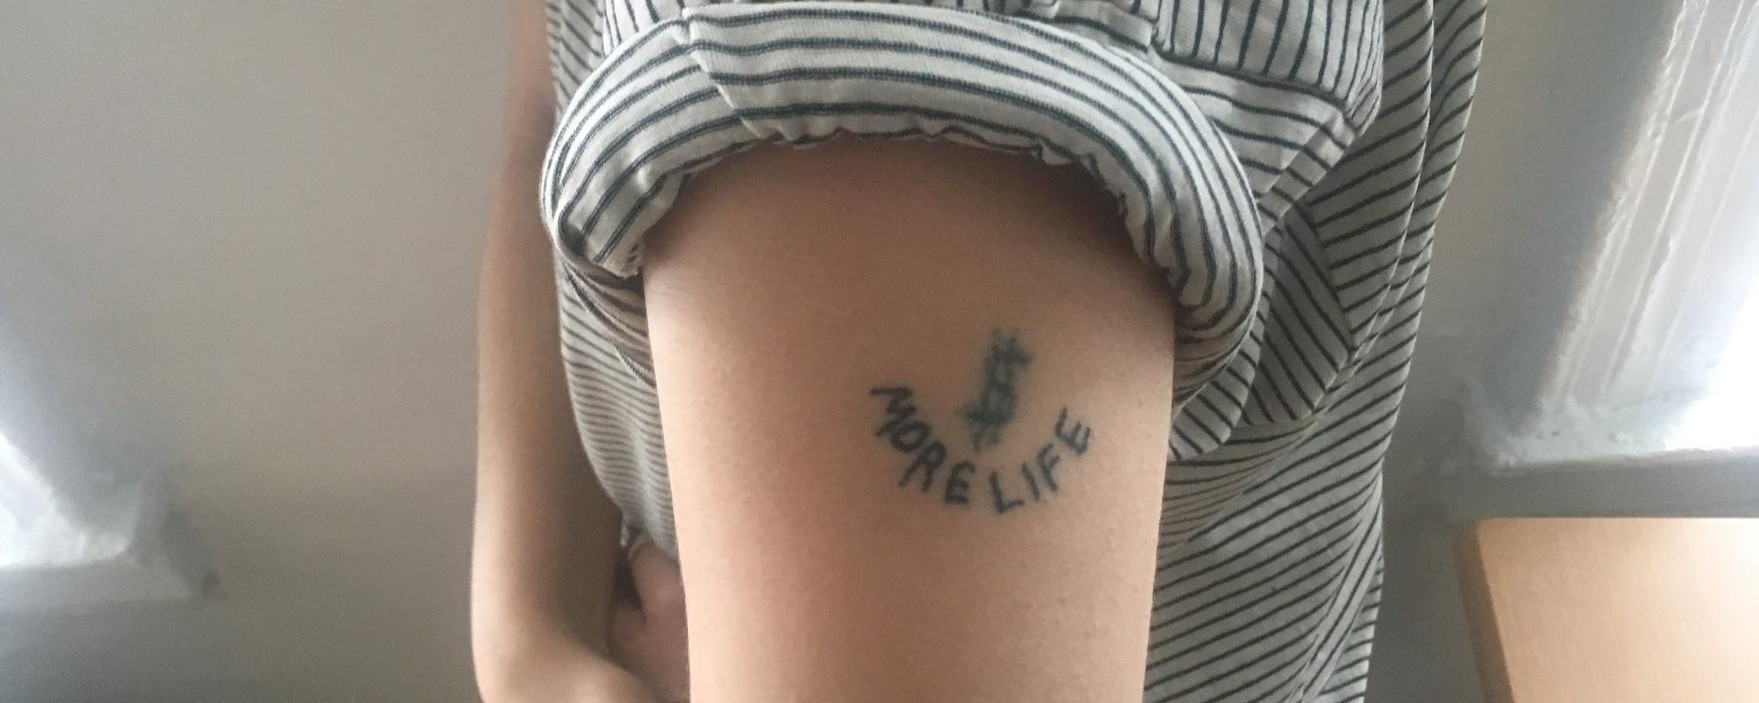 What You Should Know Before Getting a Tattoo, According to Doctors